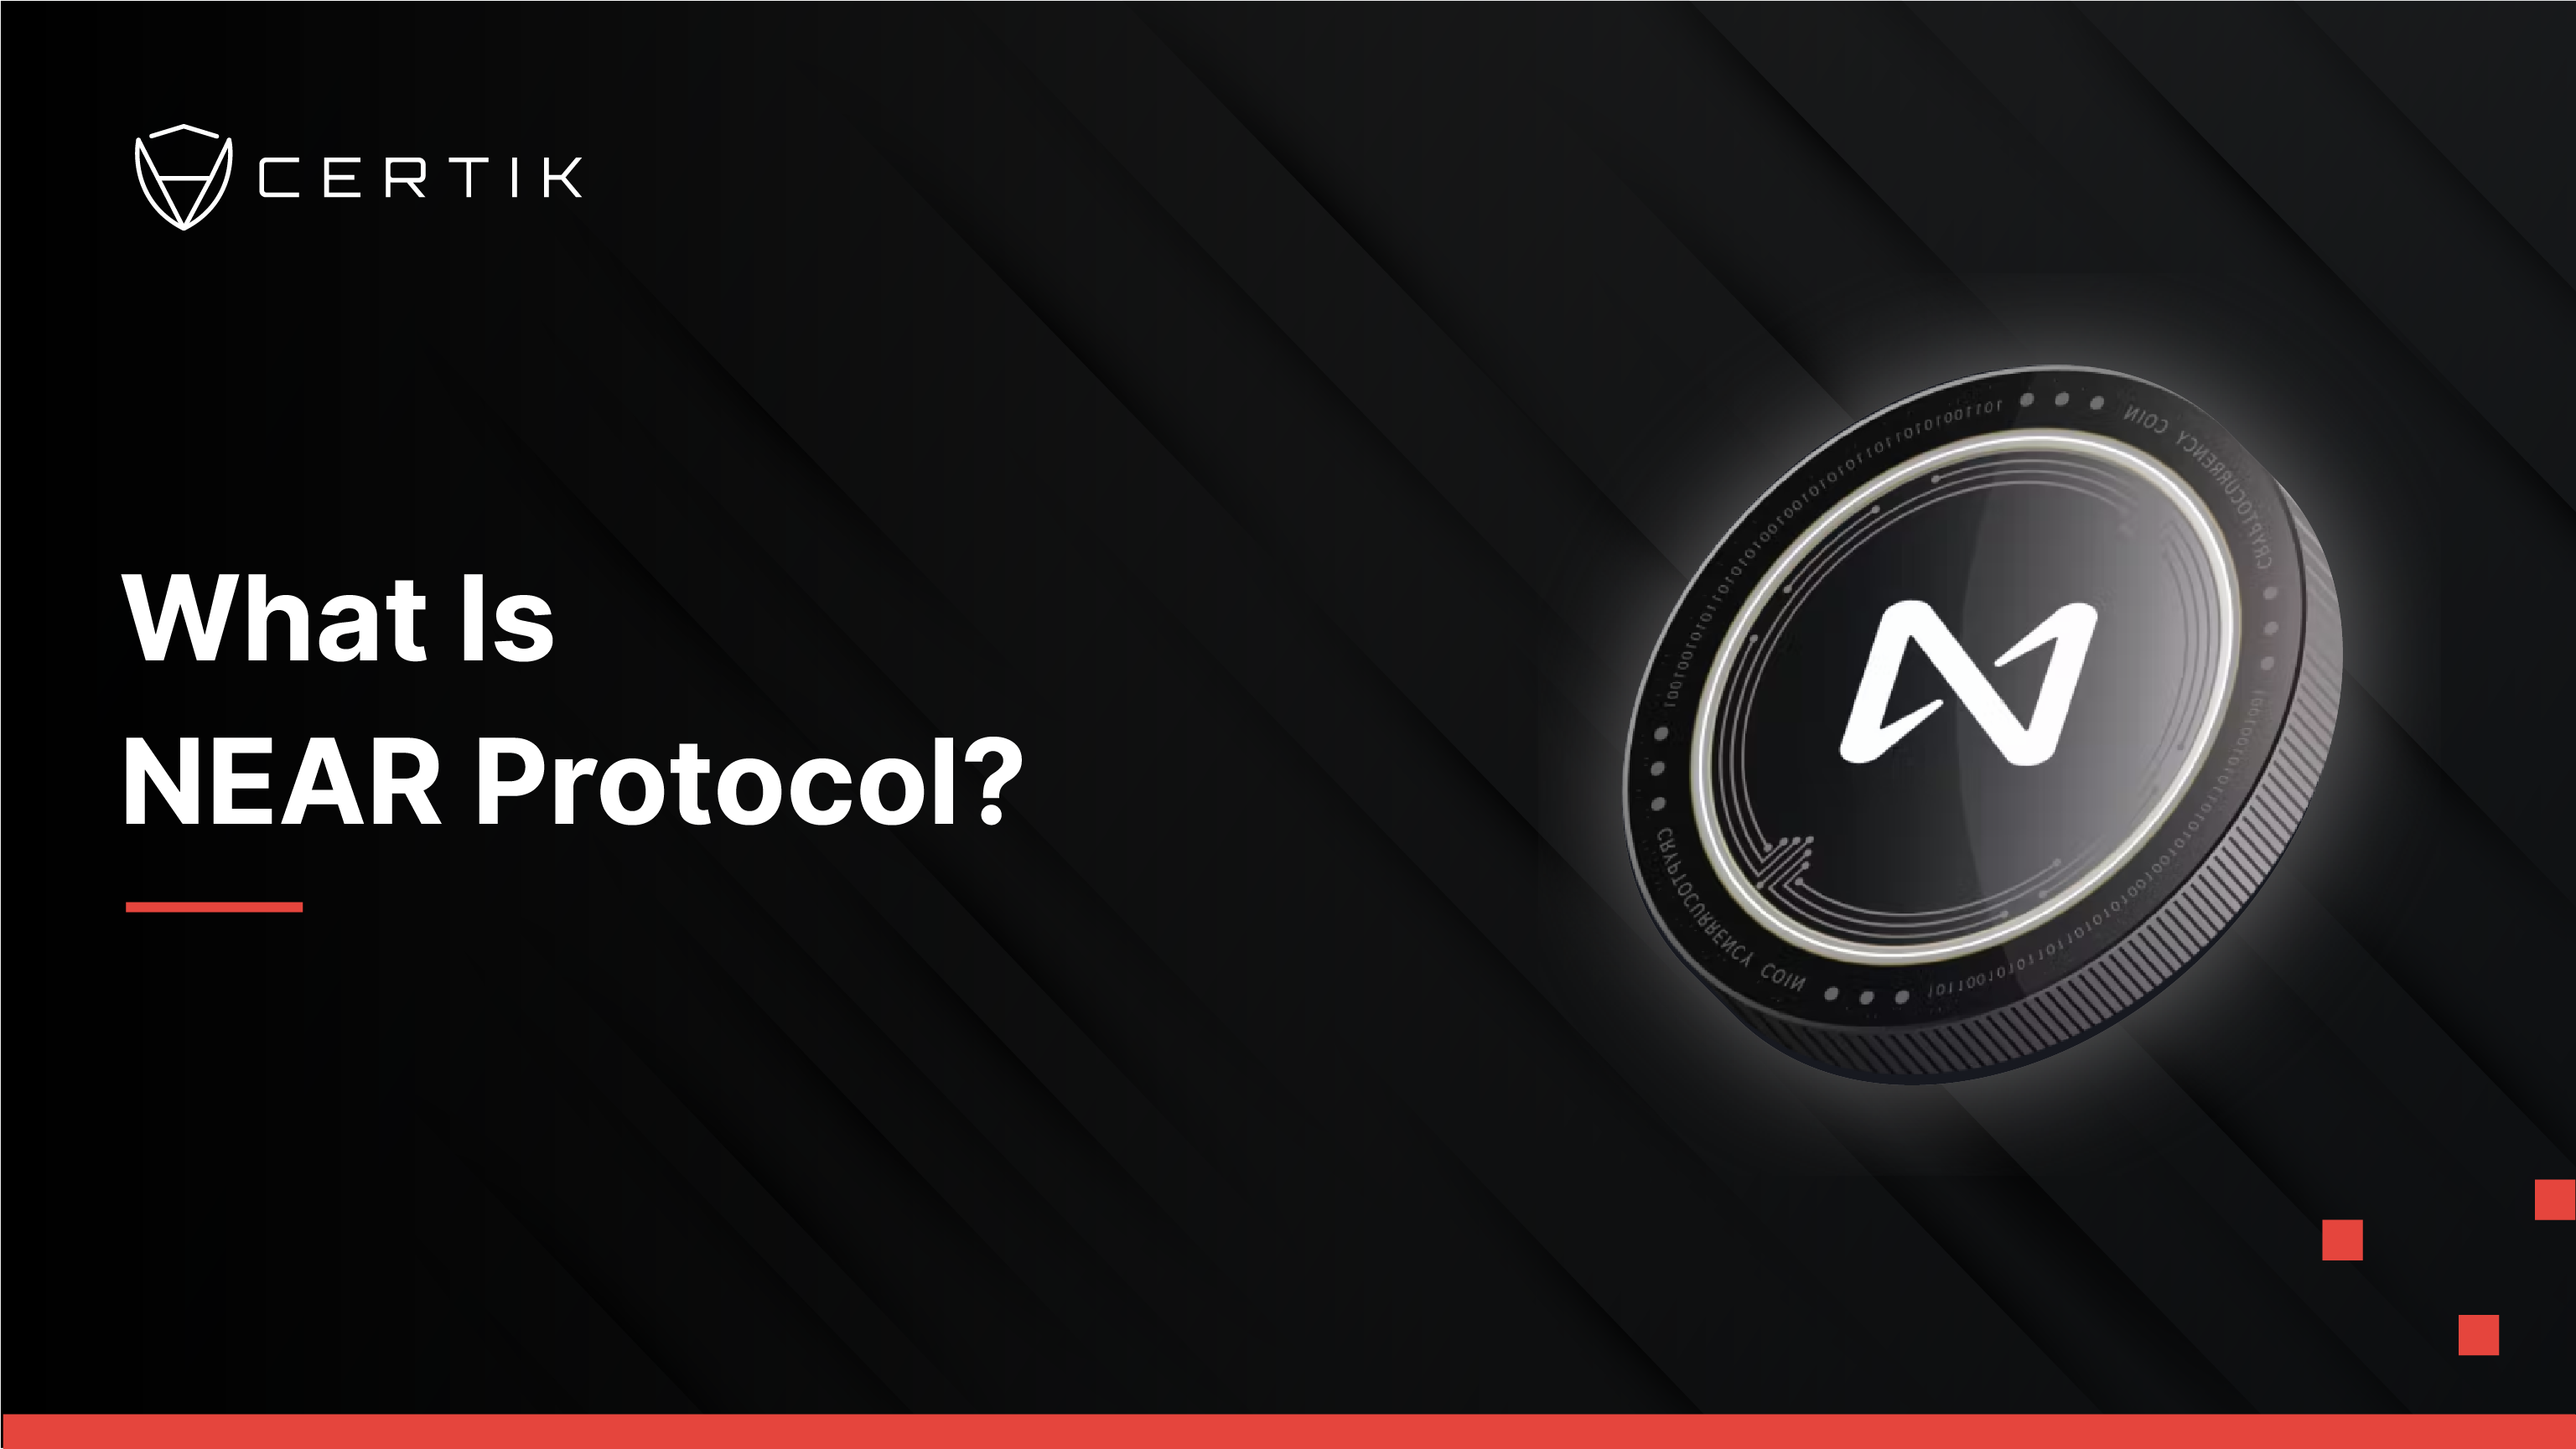 What is NEAR Protocol?